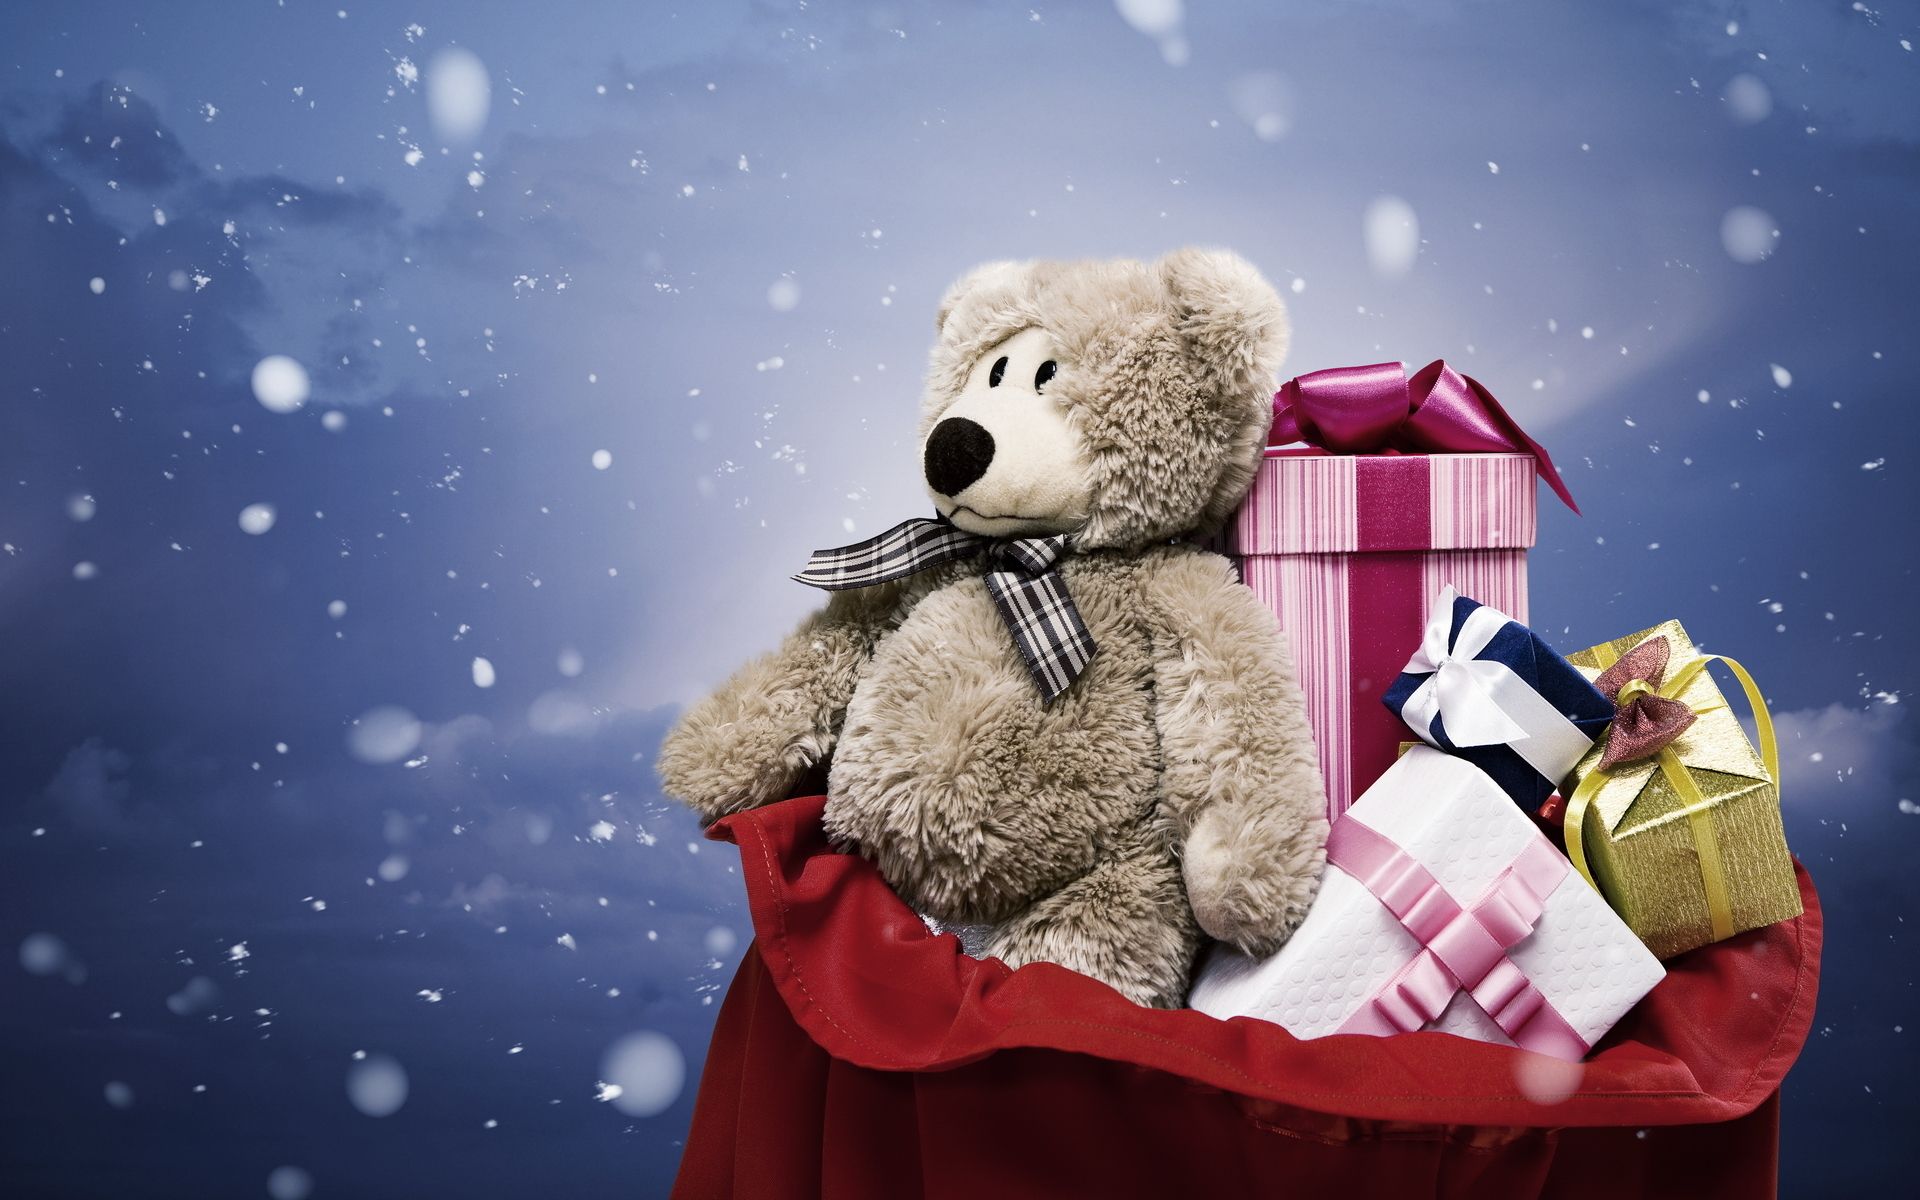 Christmas Wallpaper With Teddy Bear And Gifts Quality Image And Transparent PNG Free Clipart